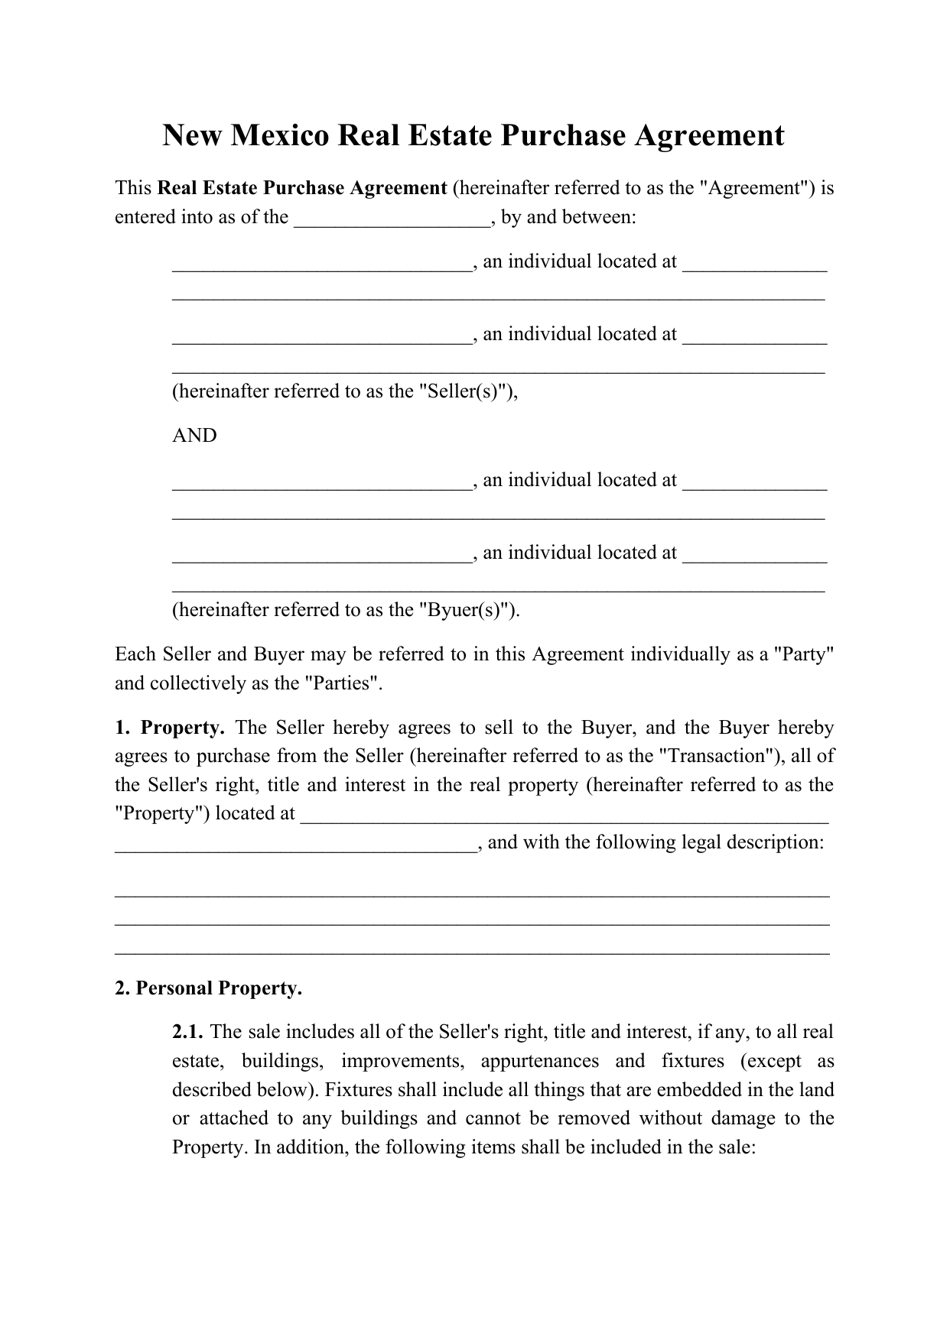 new-mexico-real-estate-purchase-agreement-template-fill-out-sign